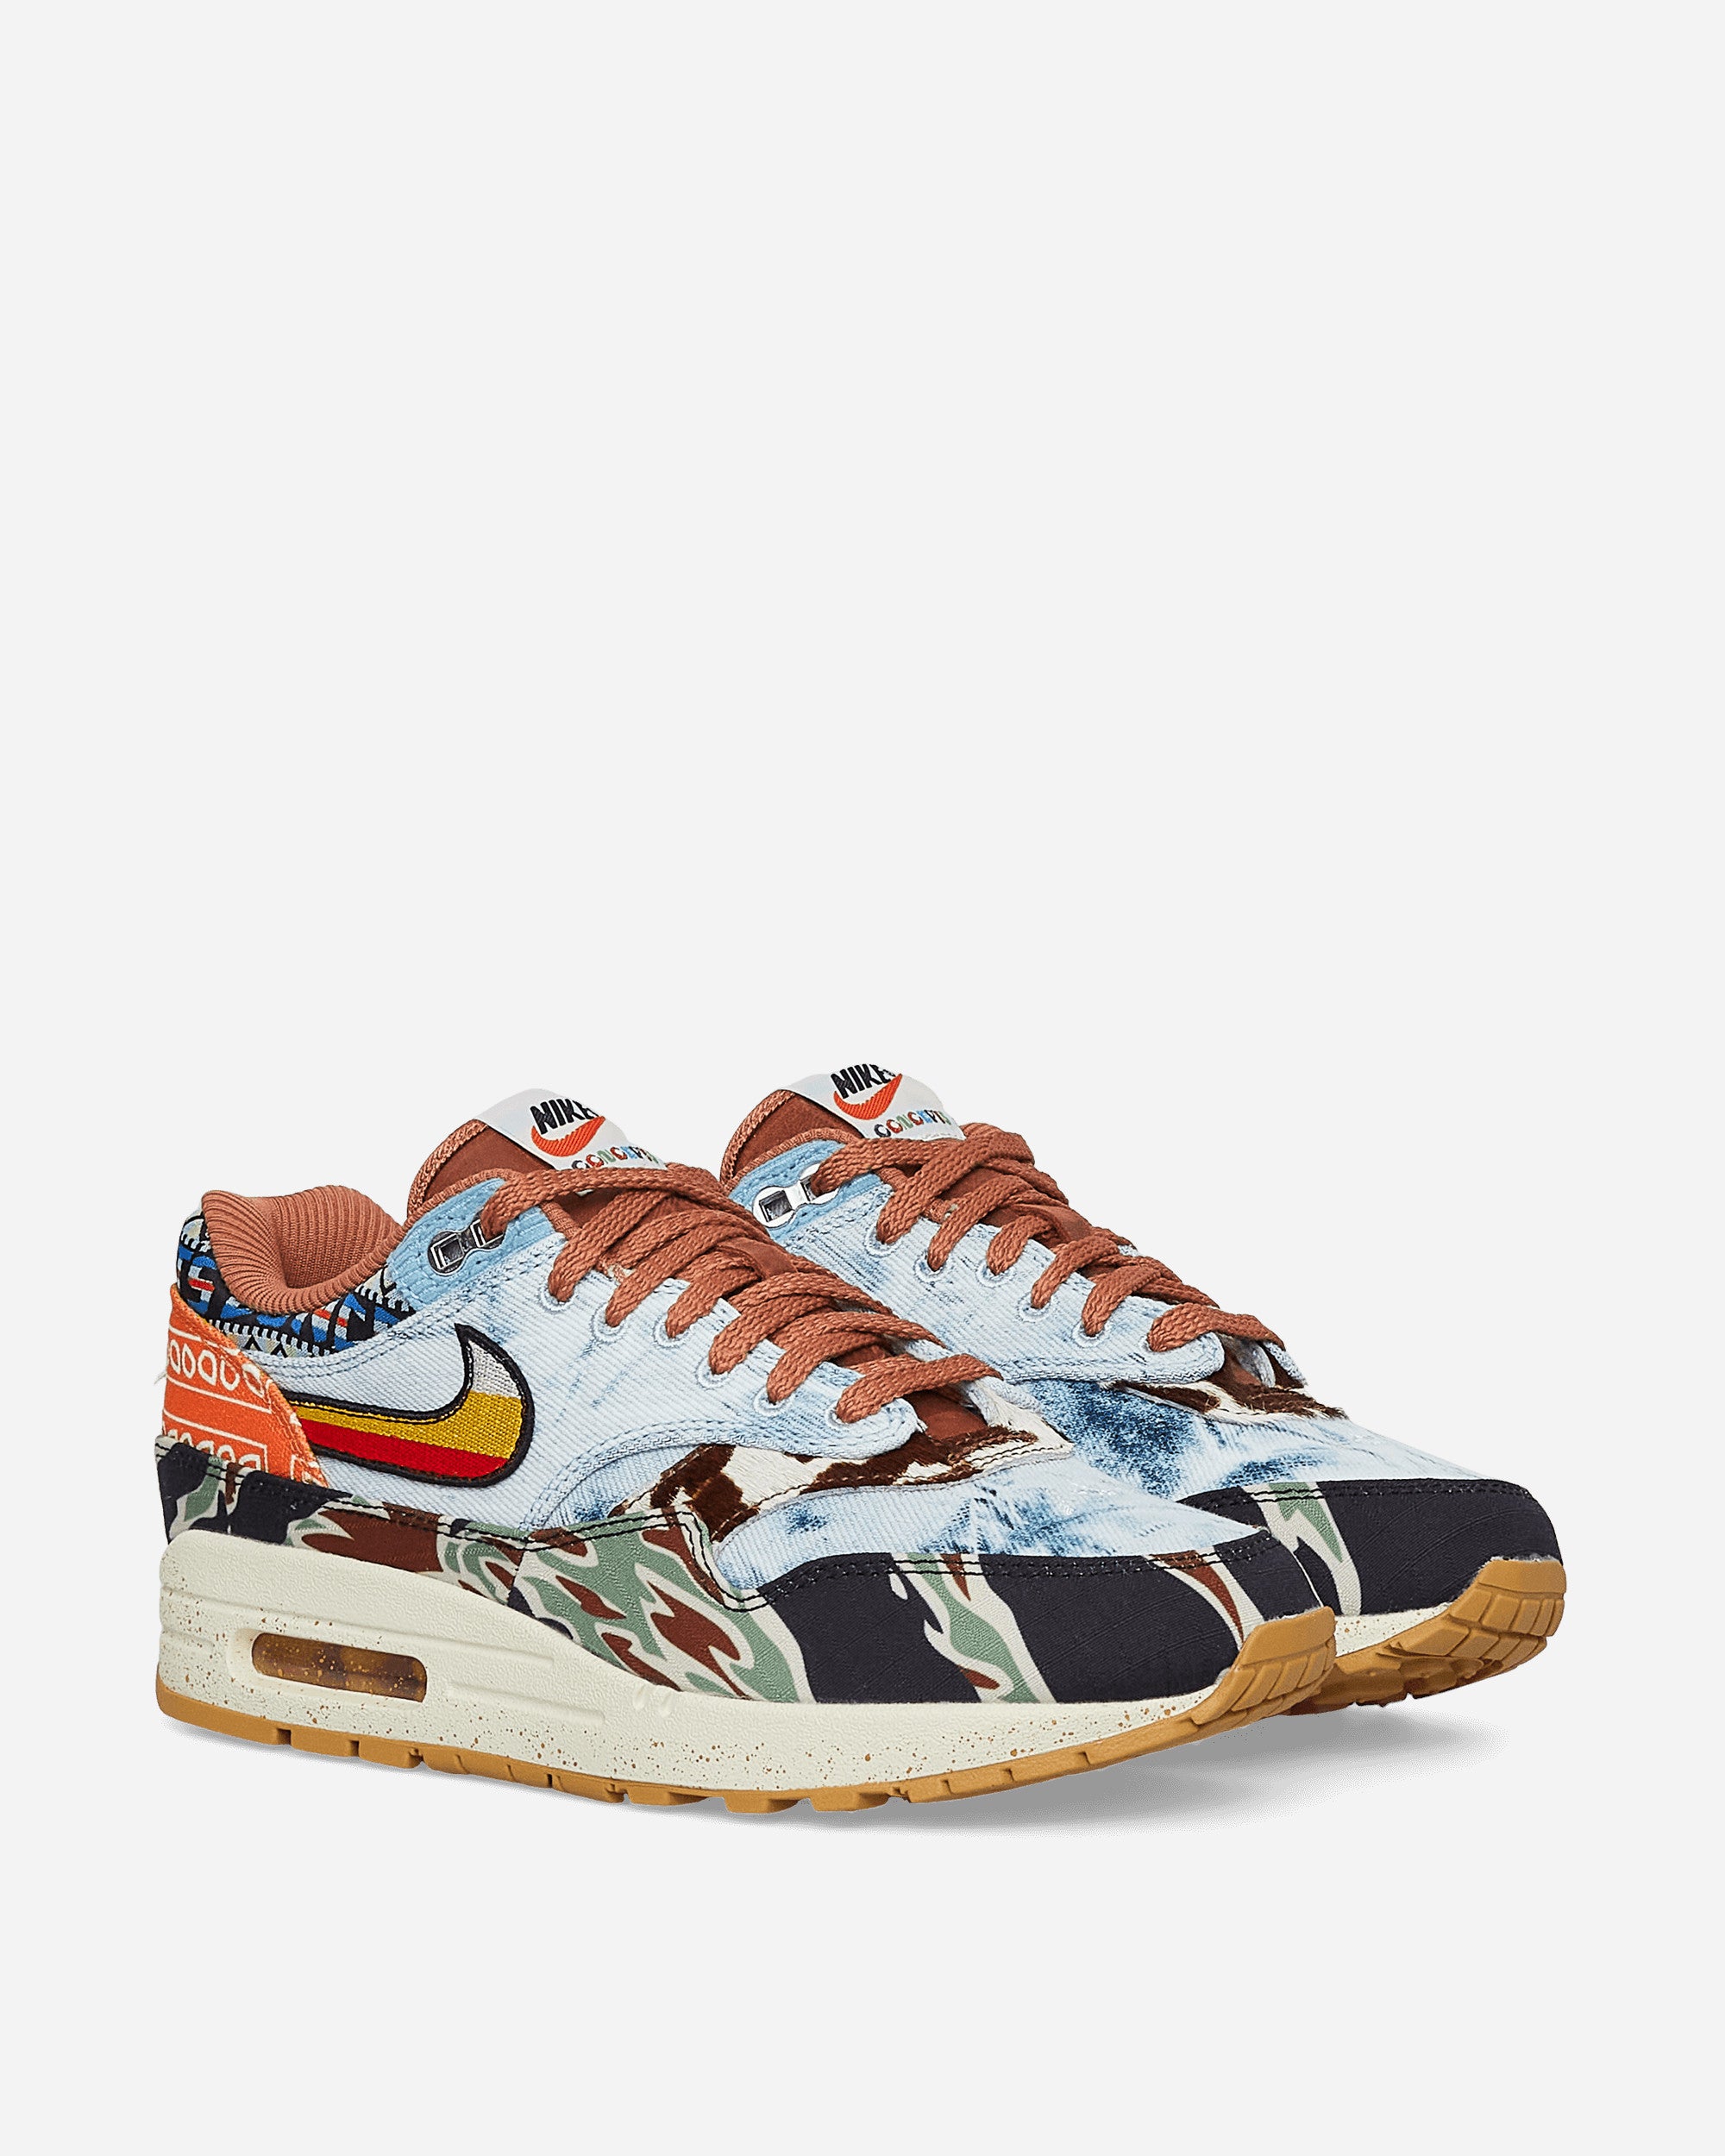 Beschaven Bachelor opleiding Absorberend Nike Concepts Air Max 1 SP 'Heavy' Sneakers - Slam Jam Official Store